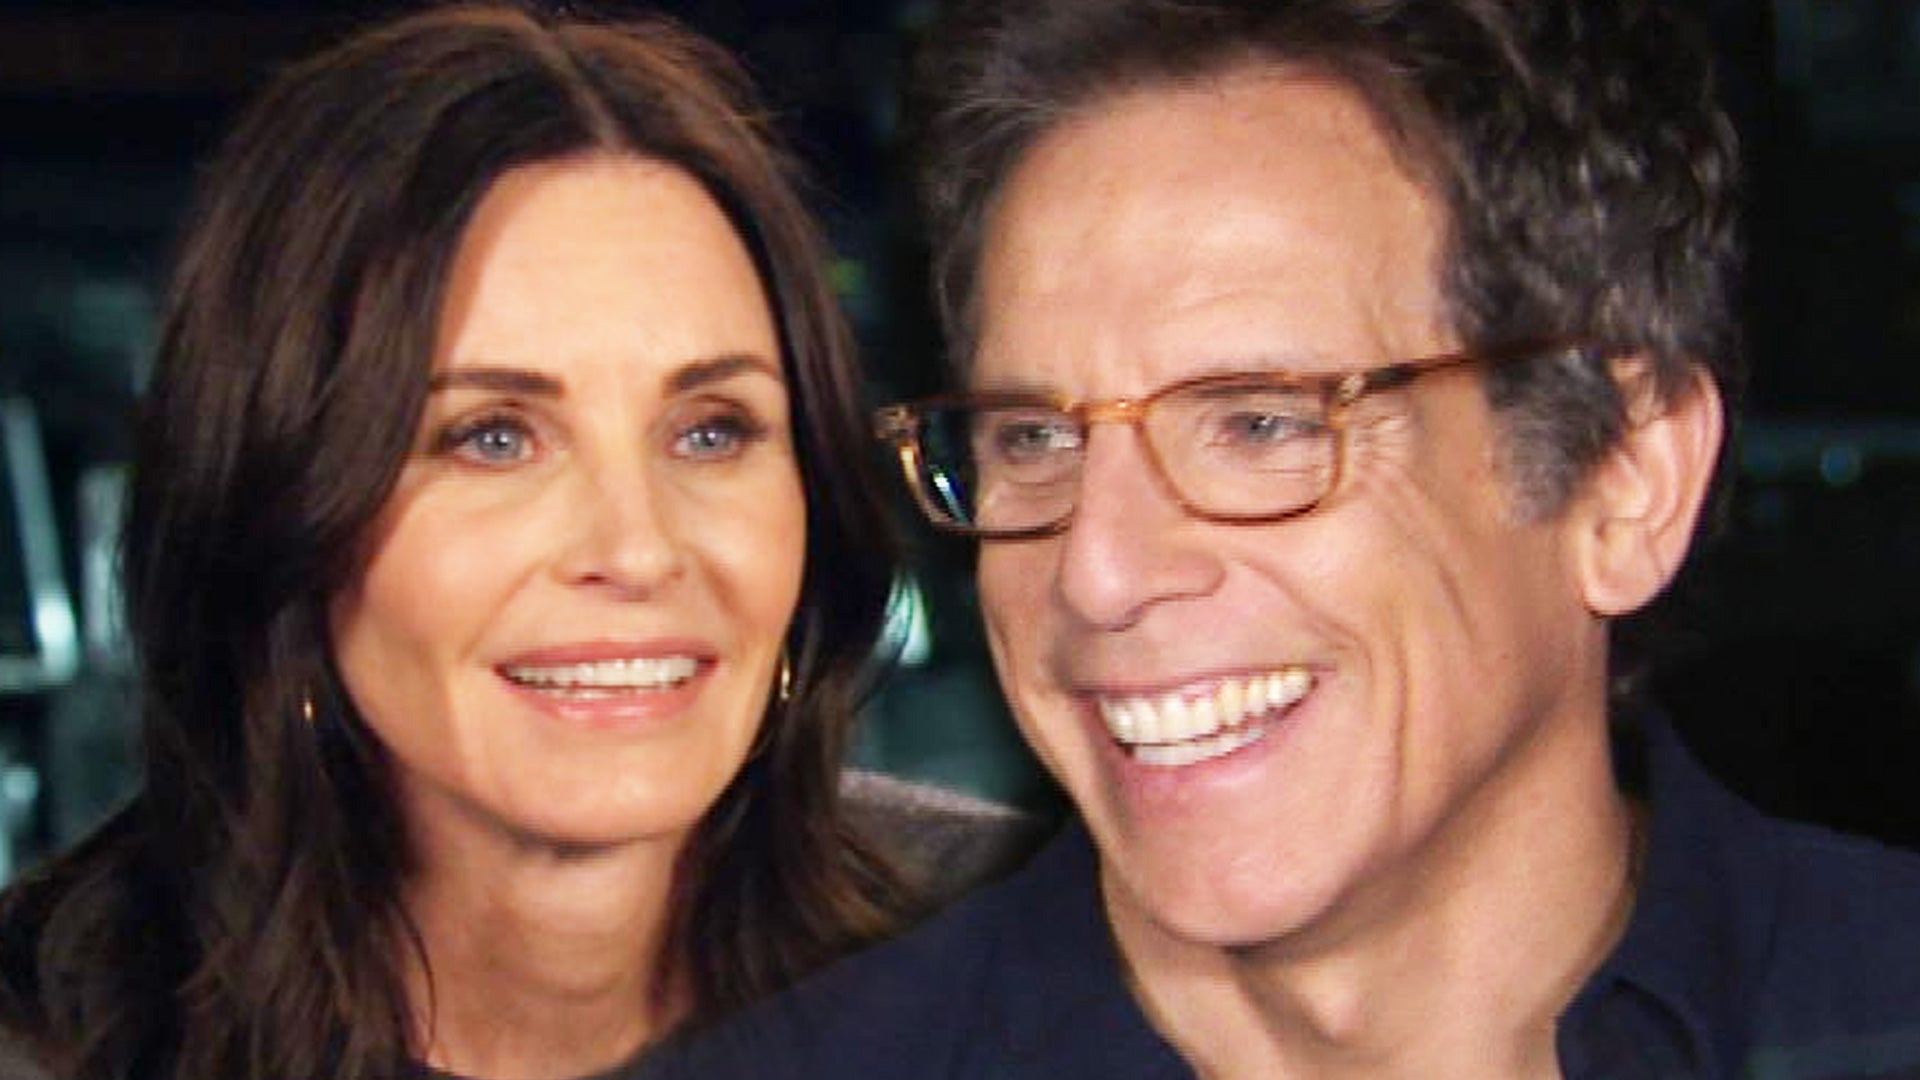 Ben Stiller Talks Being Trapped in an Escape Room With Courteney Cox